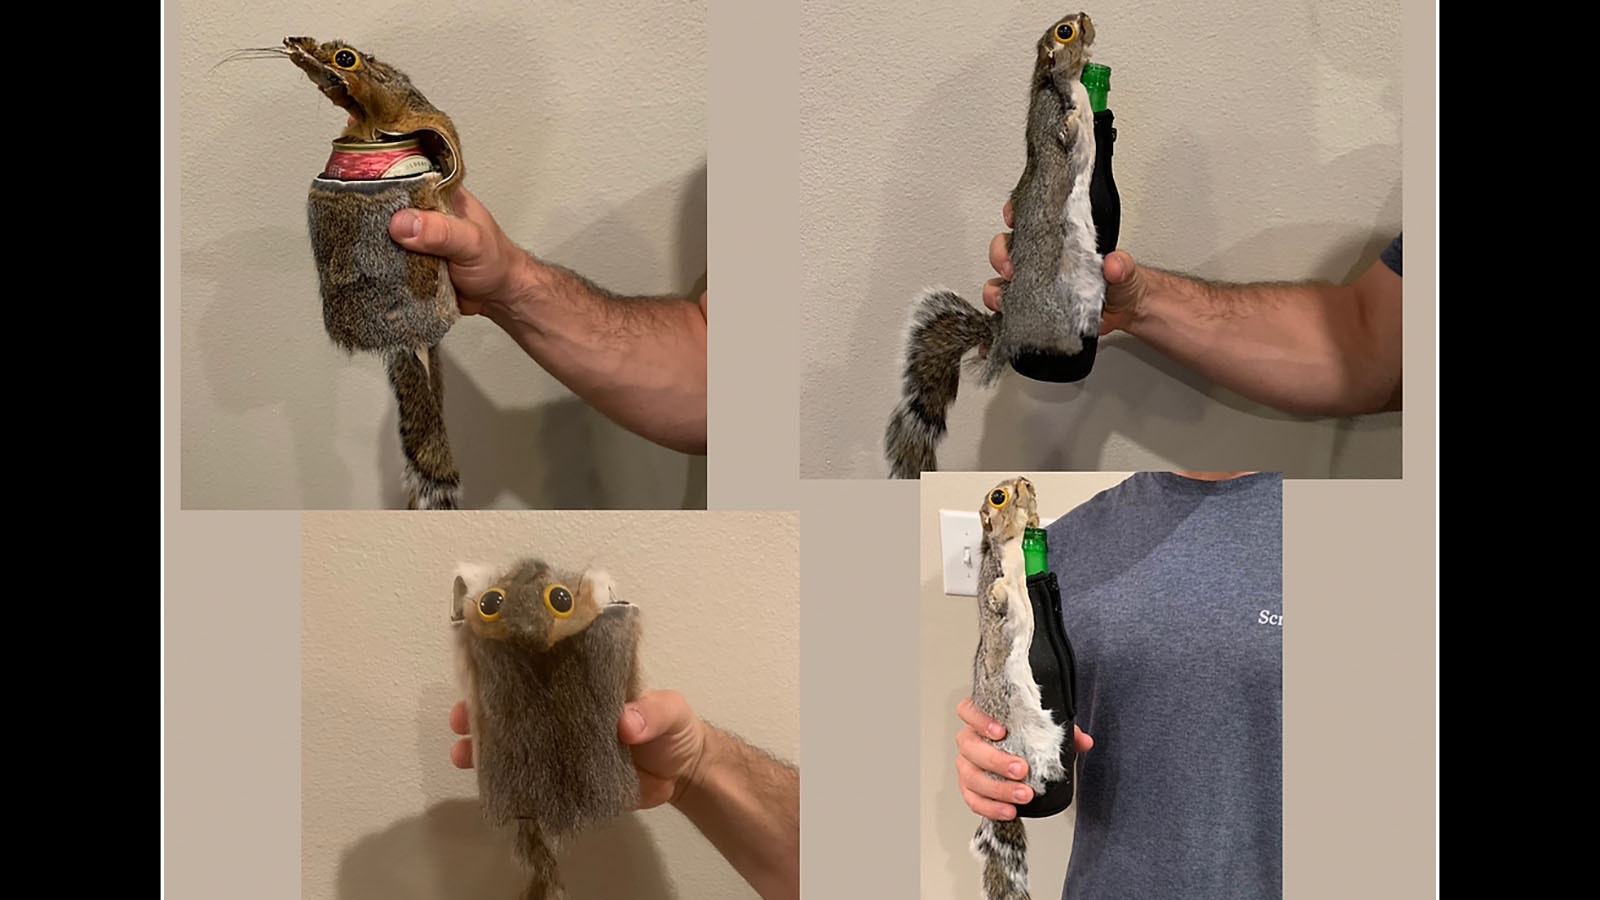 Craig and Karley Summitt's critter creations include full-animal koozies, like this Squoozie, made from a whole squirrel.